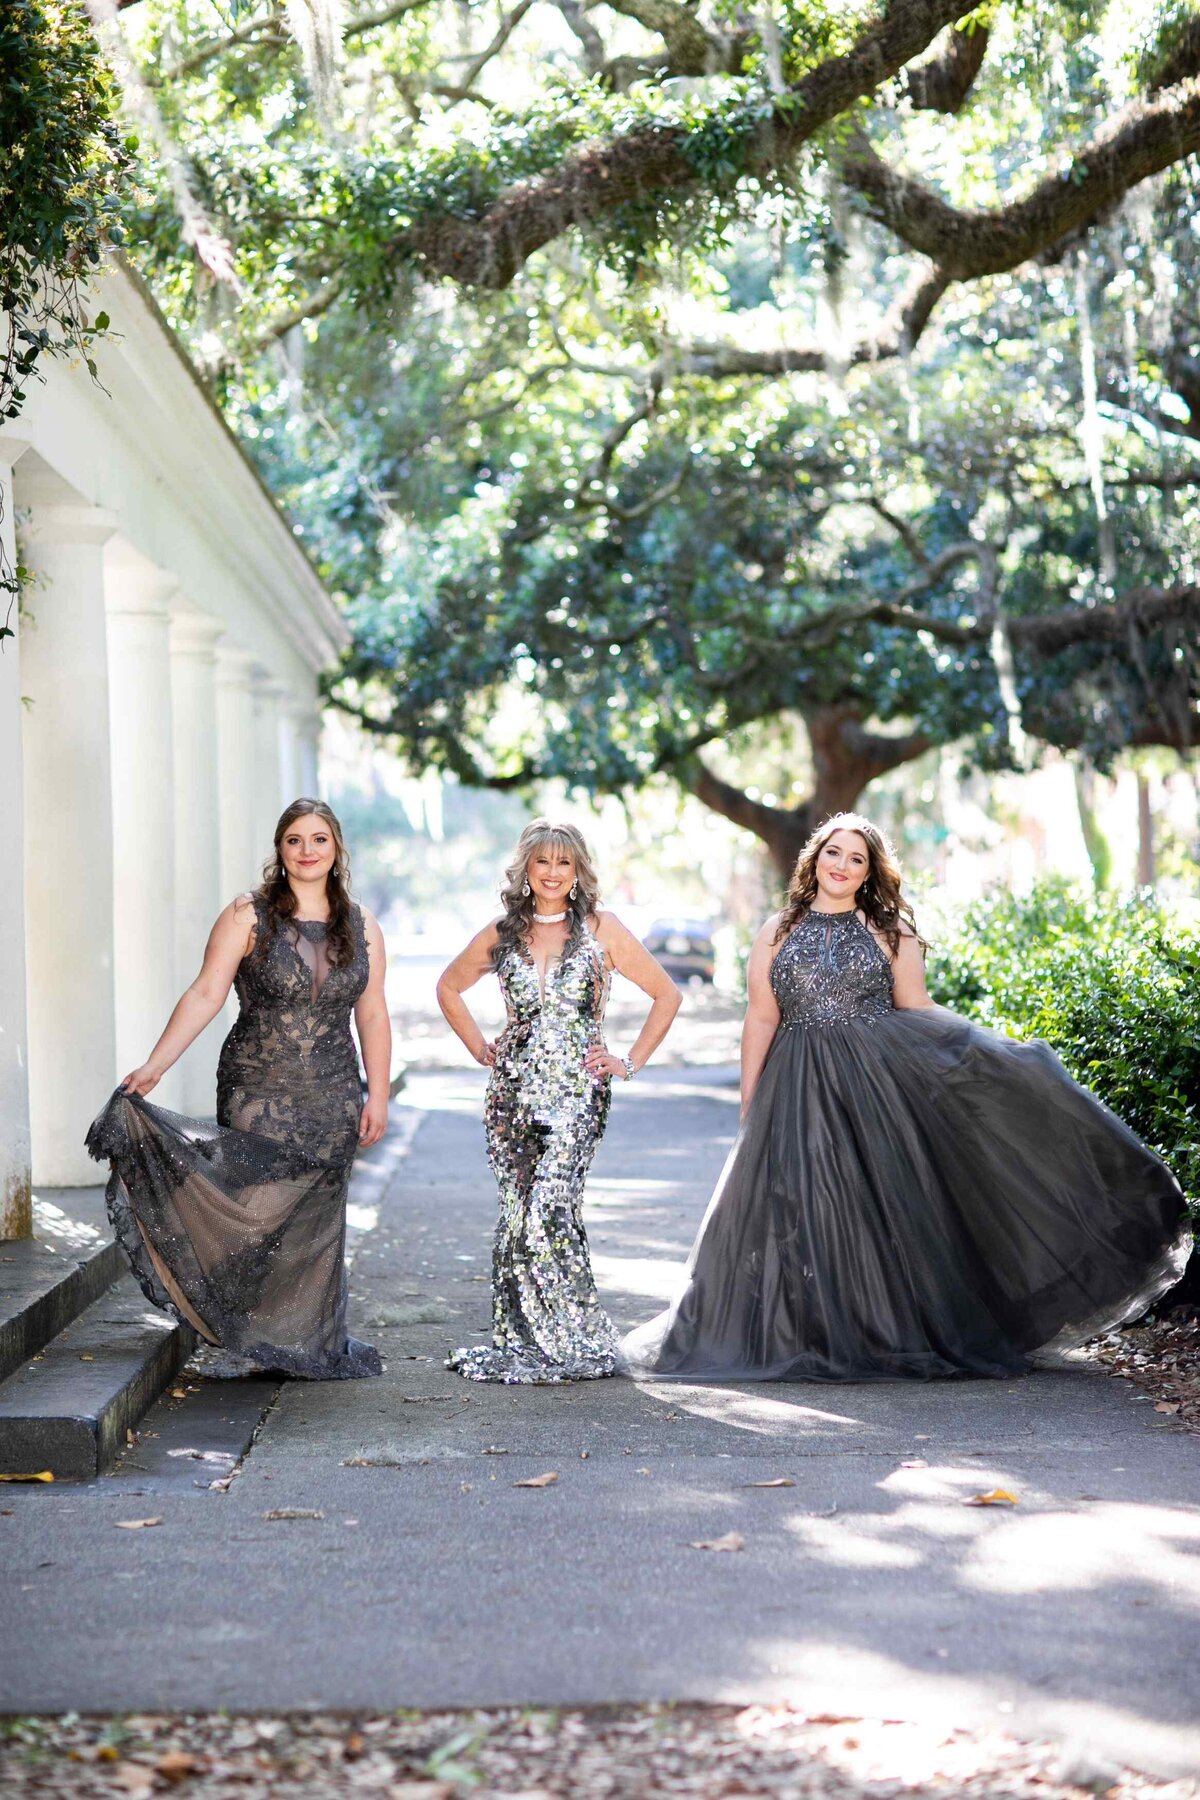 mother and daughters in glamorous gowns under trees